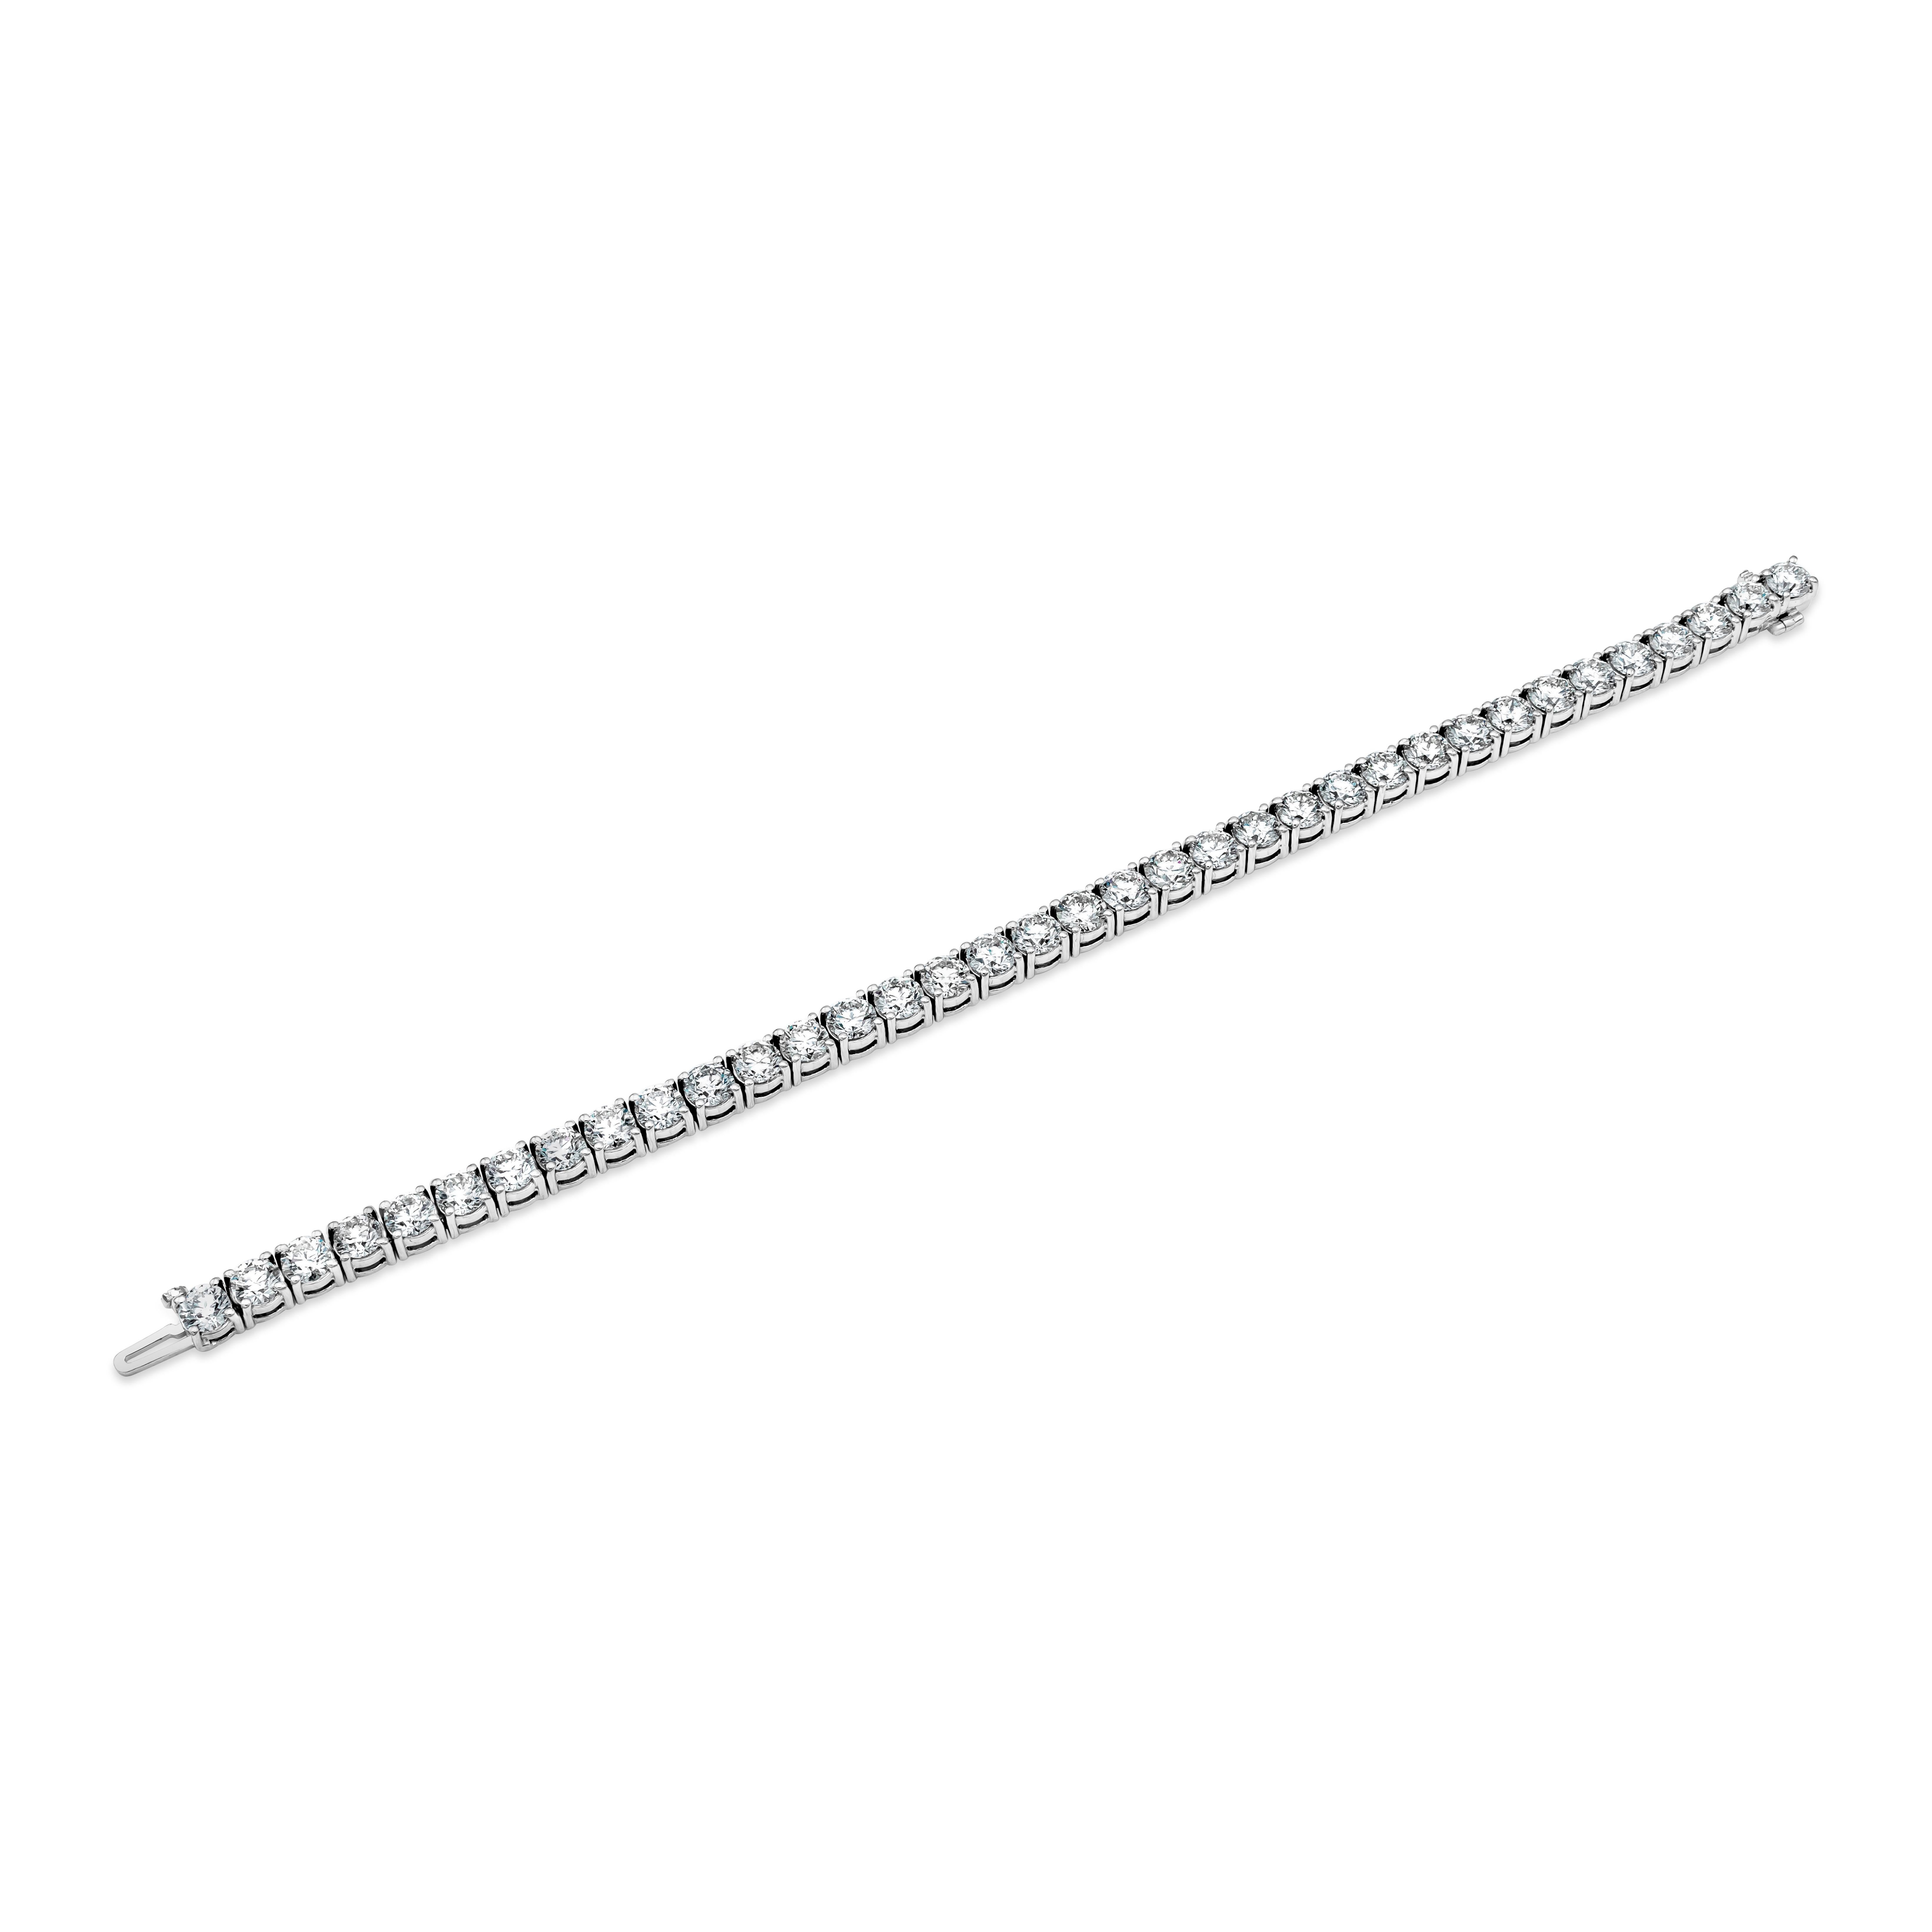 This timeless diamond tennis bracelet showcases 15.12 carats total round diamonds mounted in a classic four prong setting. Made in 14 karat white gold. 

Style available in different price ranges. Prices are based on diamond size, and specification.